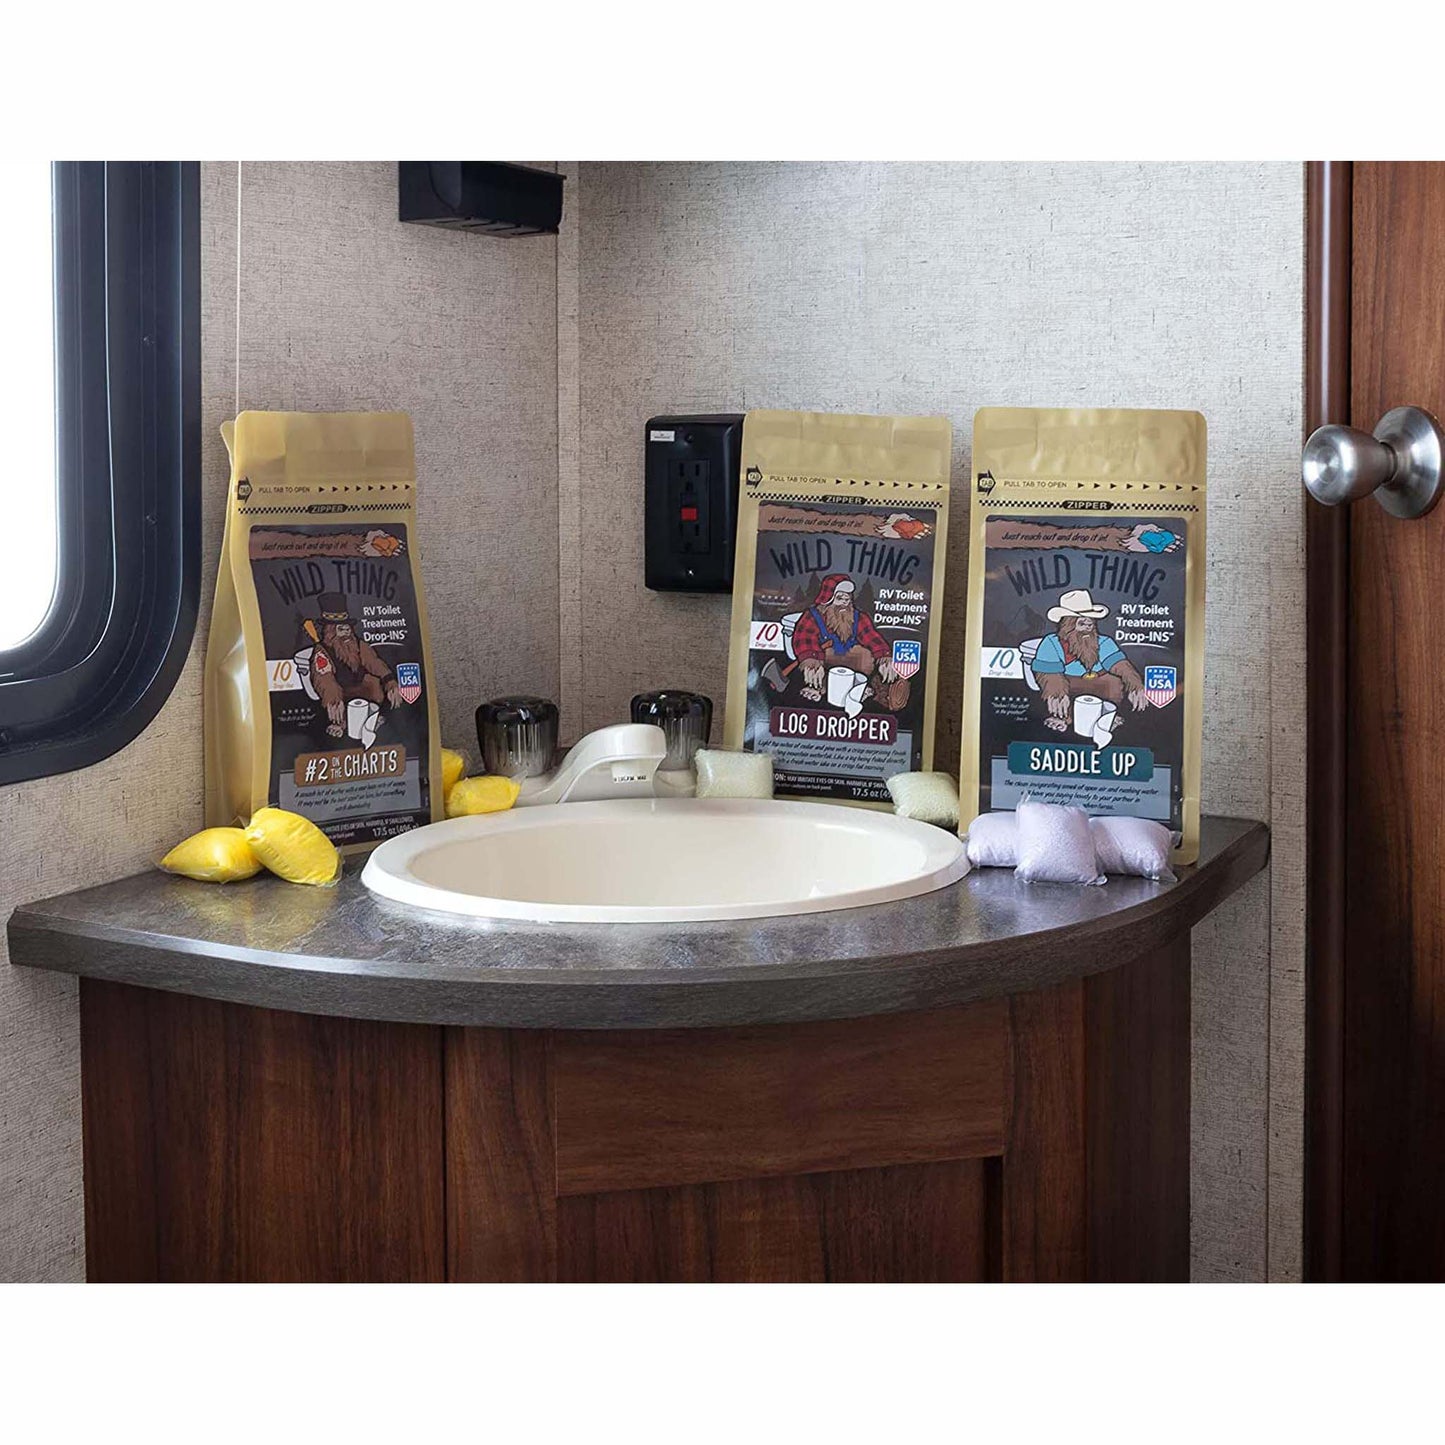 Camco Wild Thing RV Toilet Treatment Drop-Ins, #2 On the Charts, 10 per Bag